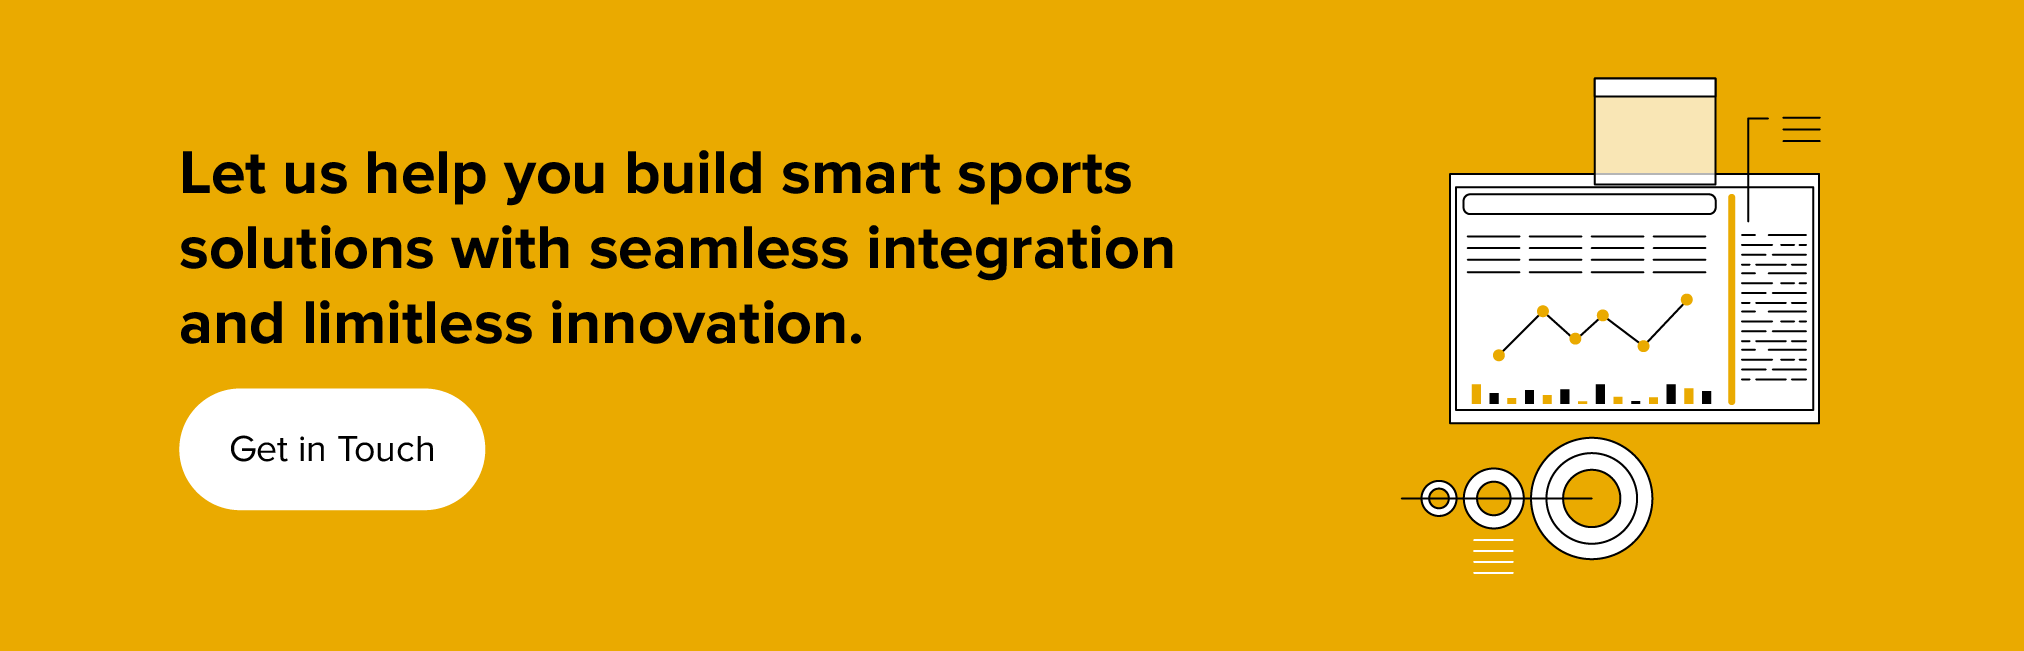 Build smart sports solutions